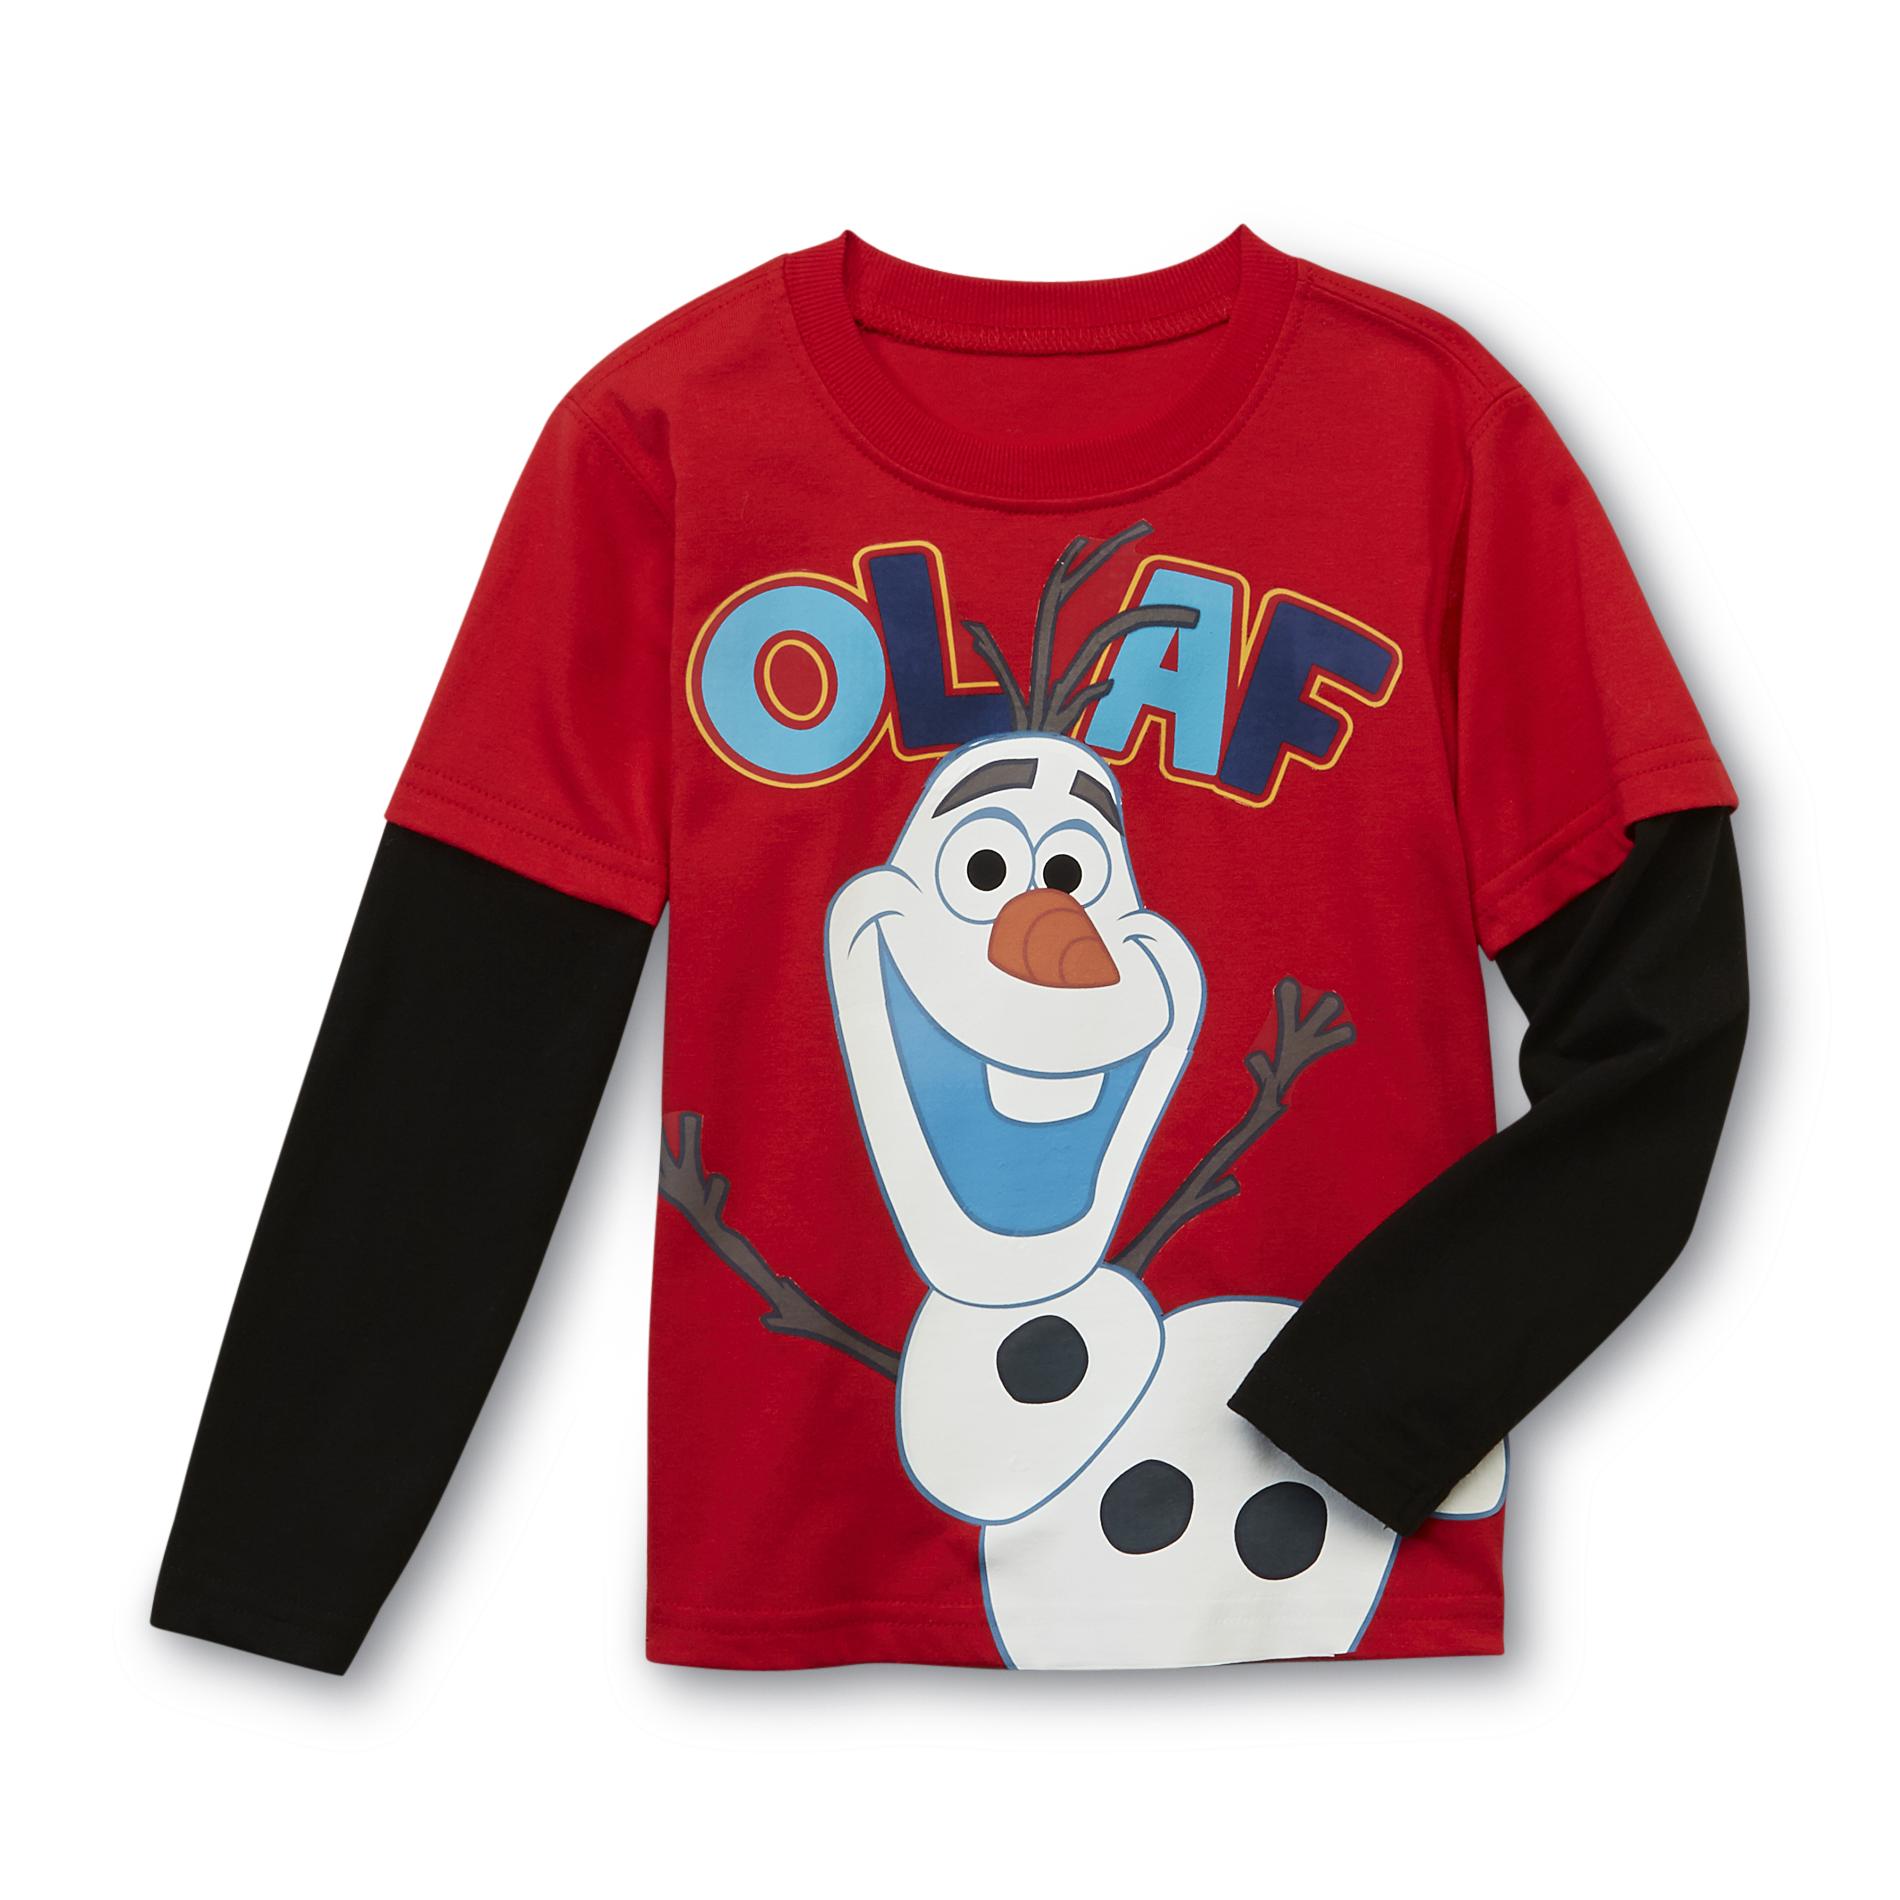 Disney Frozen Toddler Boy's Layered-Look Graphic T-Shirt- Olaf